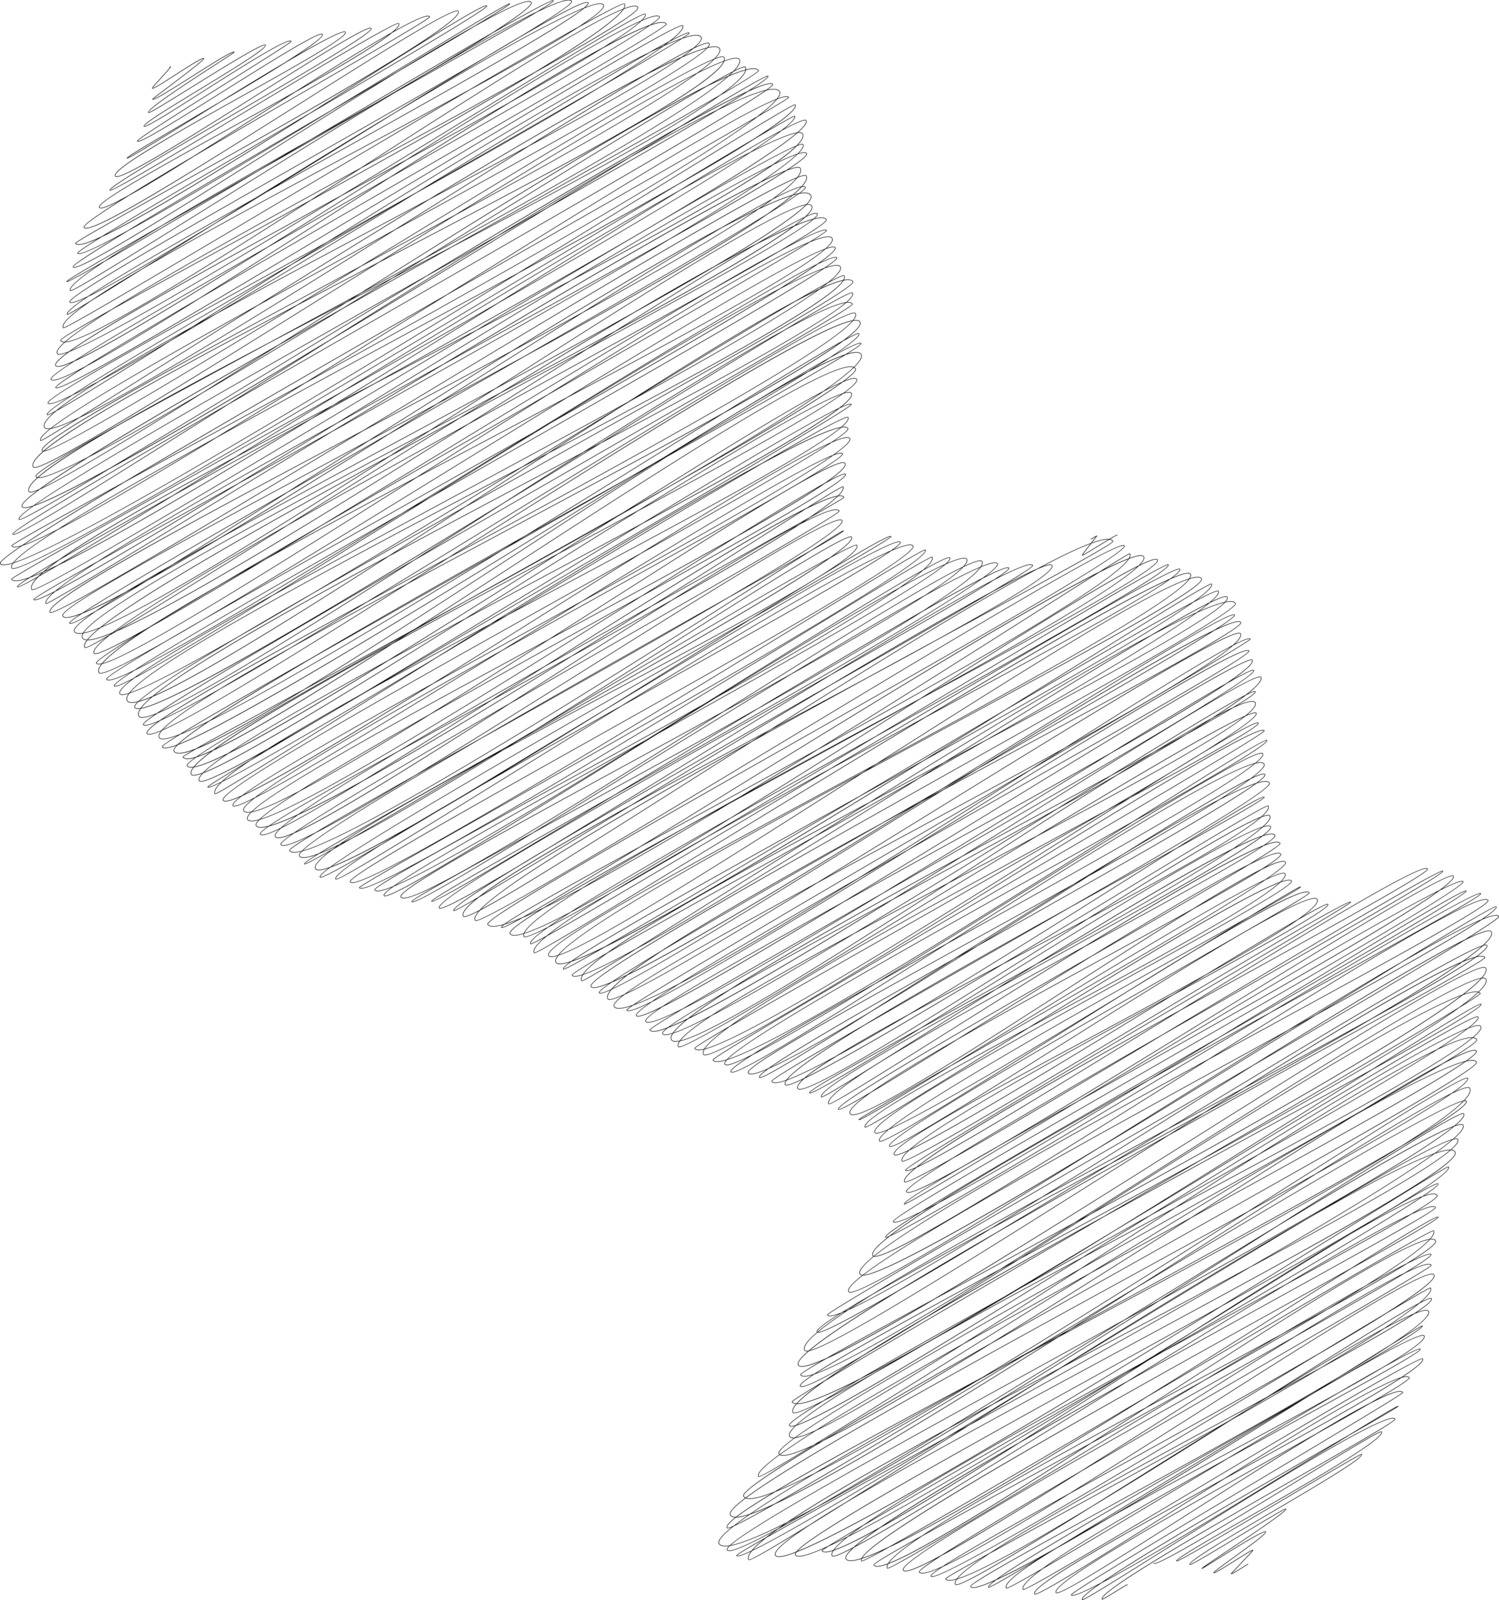 Paraguay - pencil scribble sketch silhouette map of country area with dropped shadow. Simple flat vector illustration.